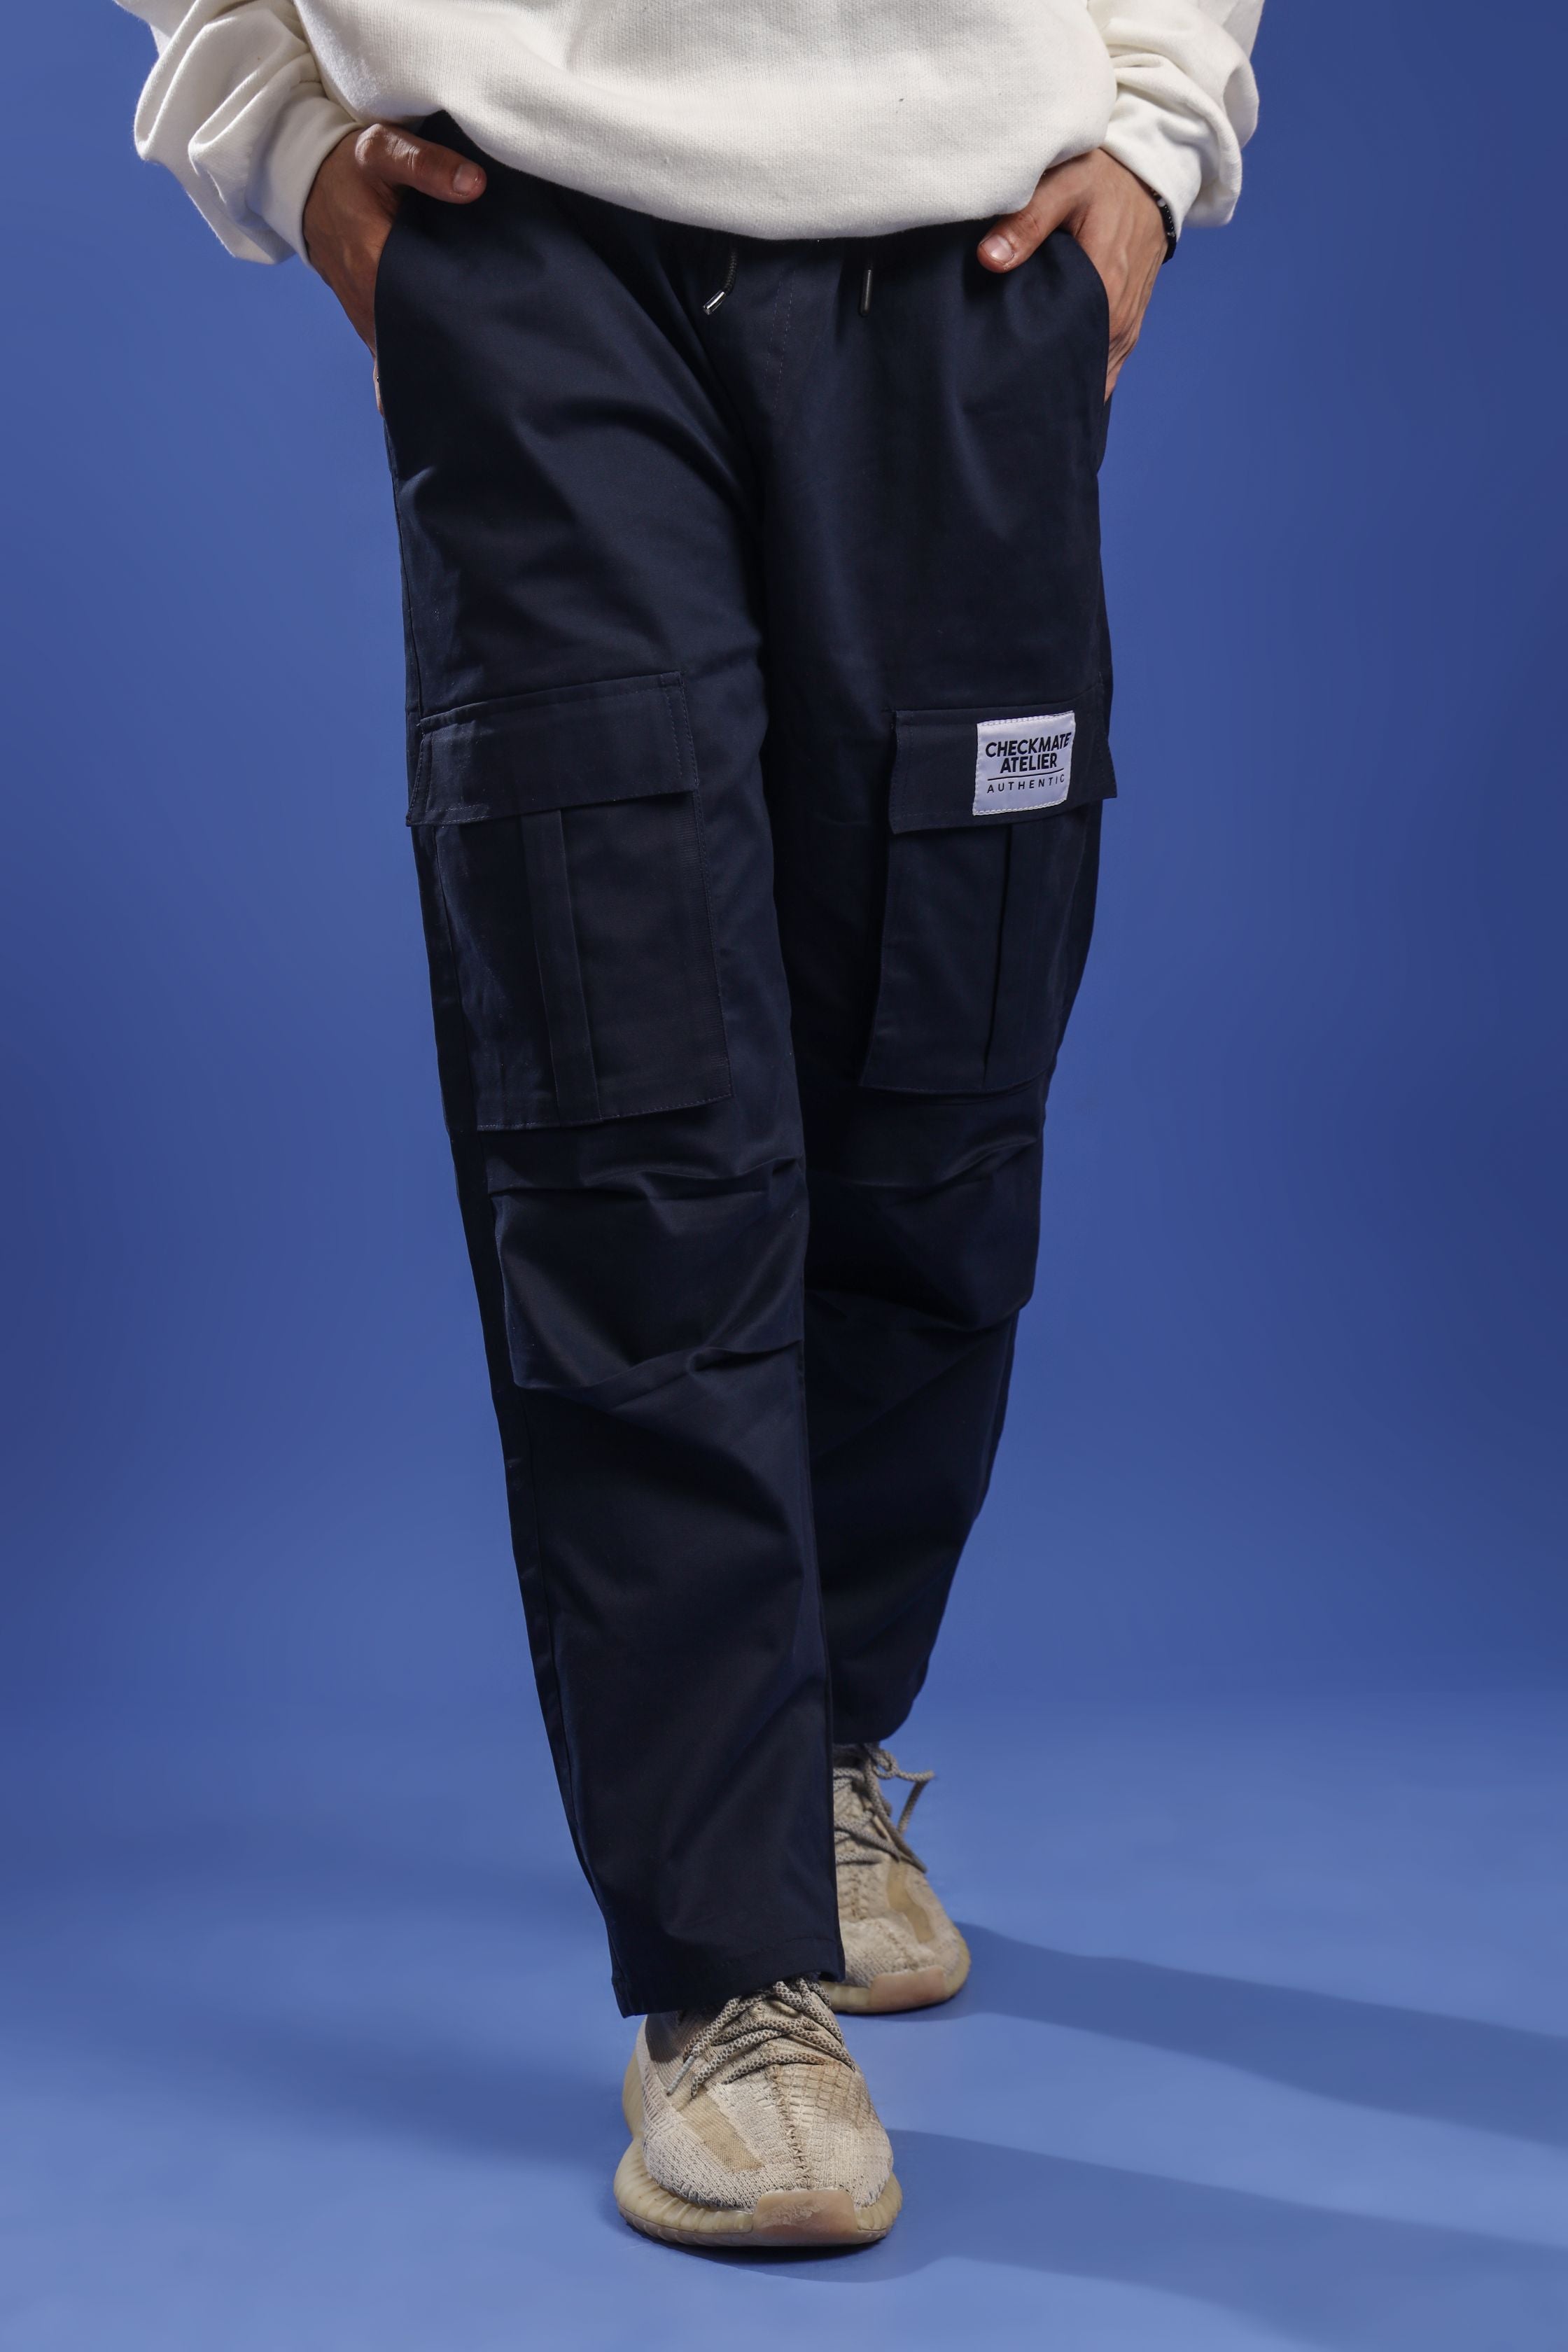 BLUE STRAIGHT CARGO PANT - Shop Now - Checkmate Atelier